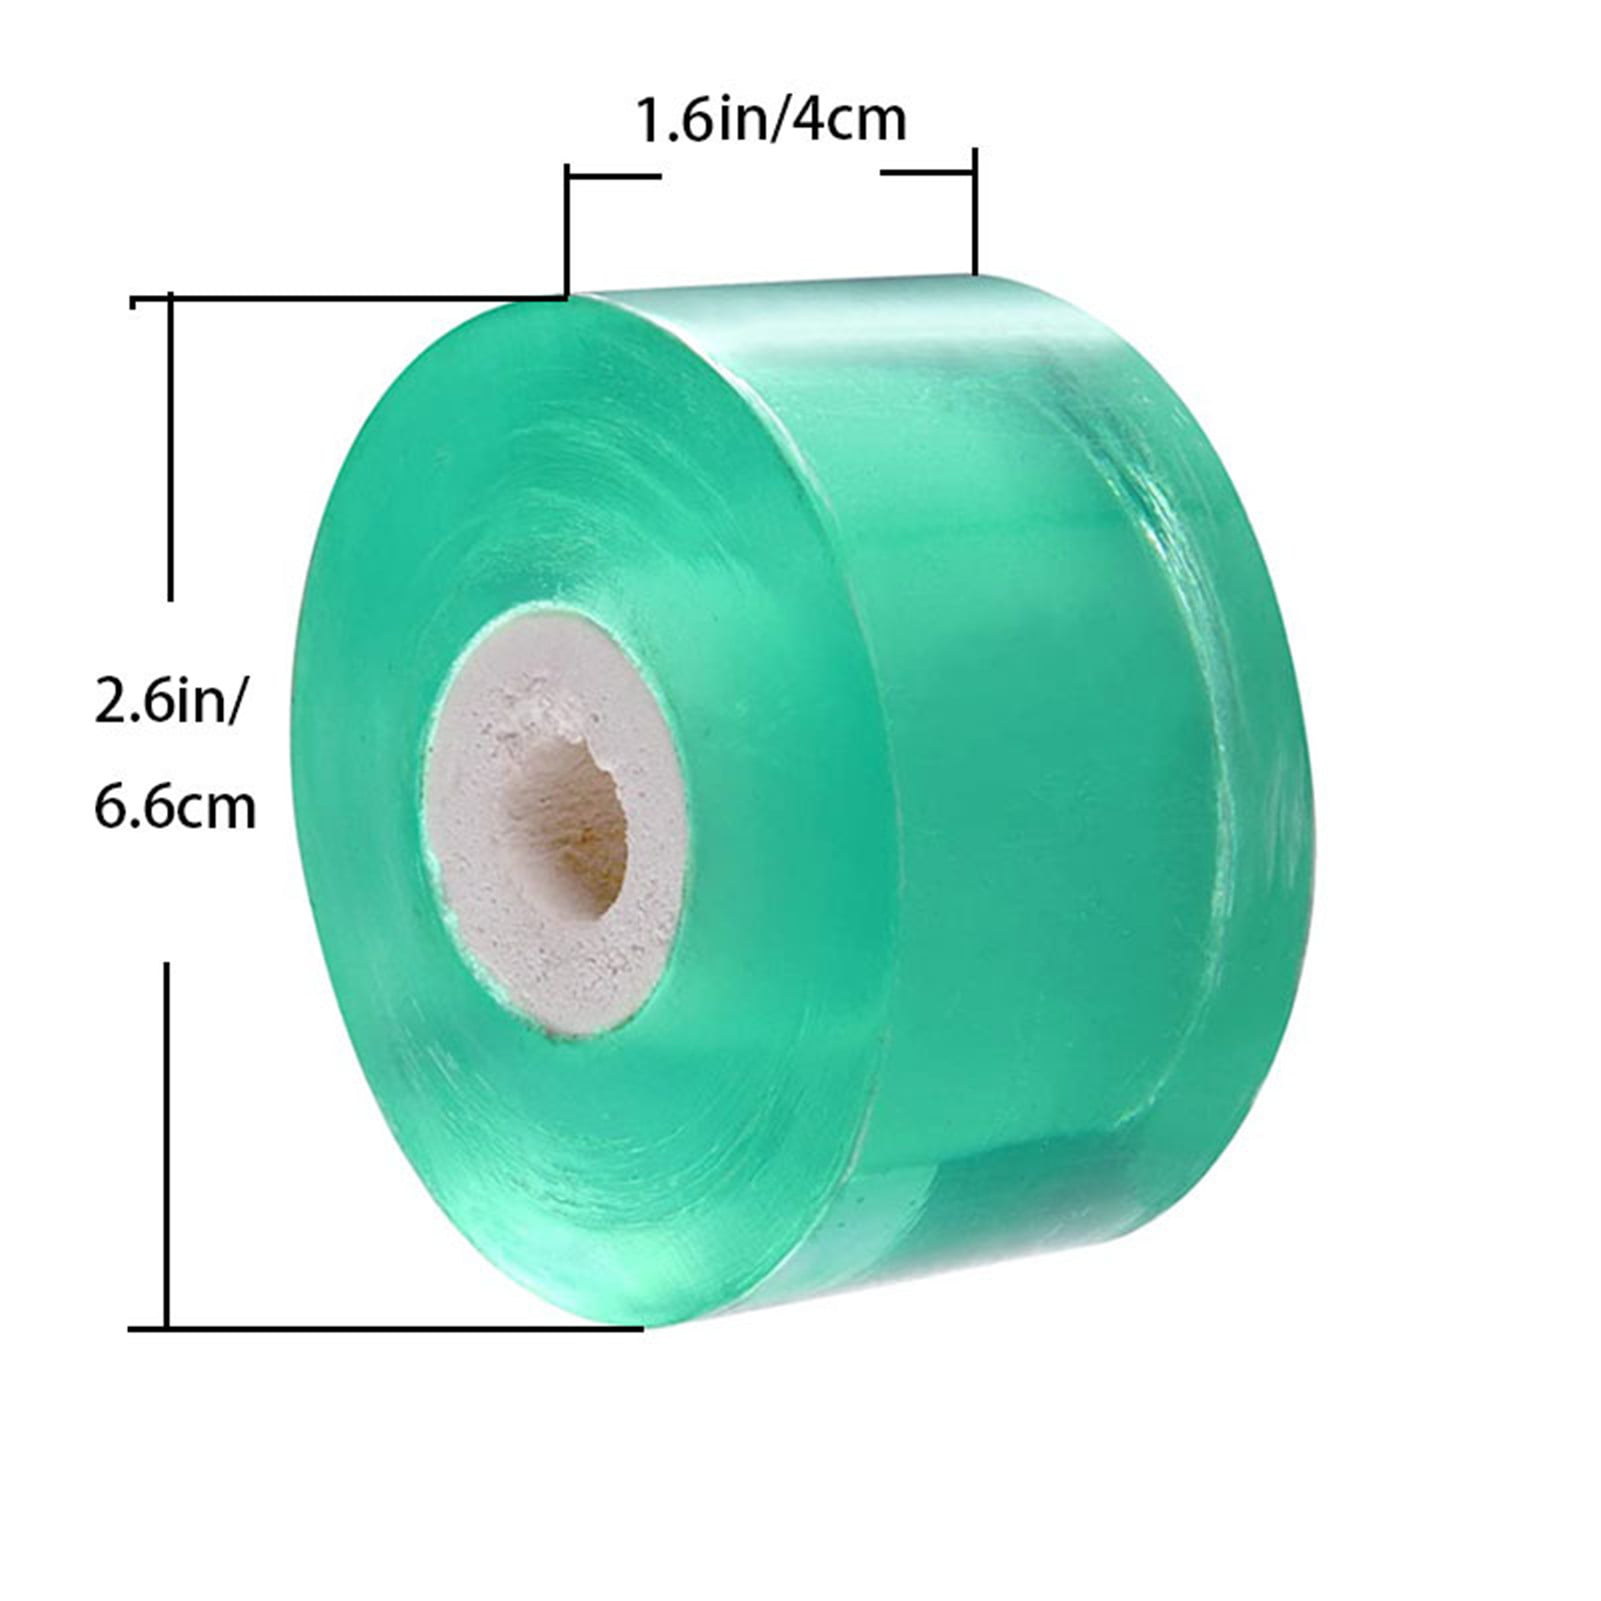 Details about   Grafting Tape Stretchable Self-adhesive For Garden 3cm Seedling Tree Nursery 